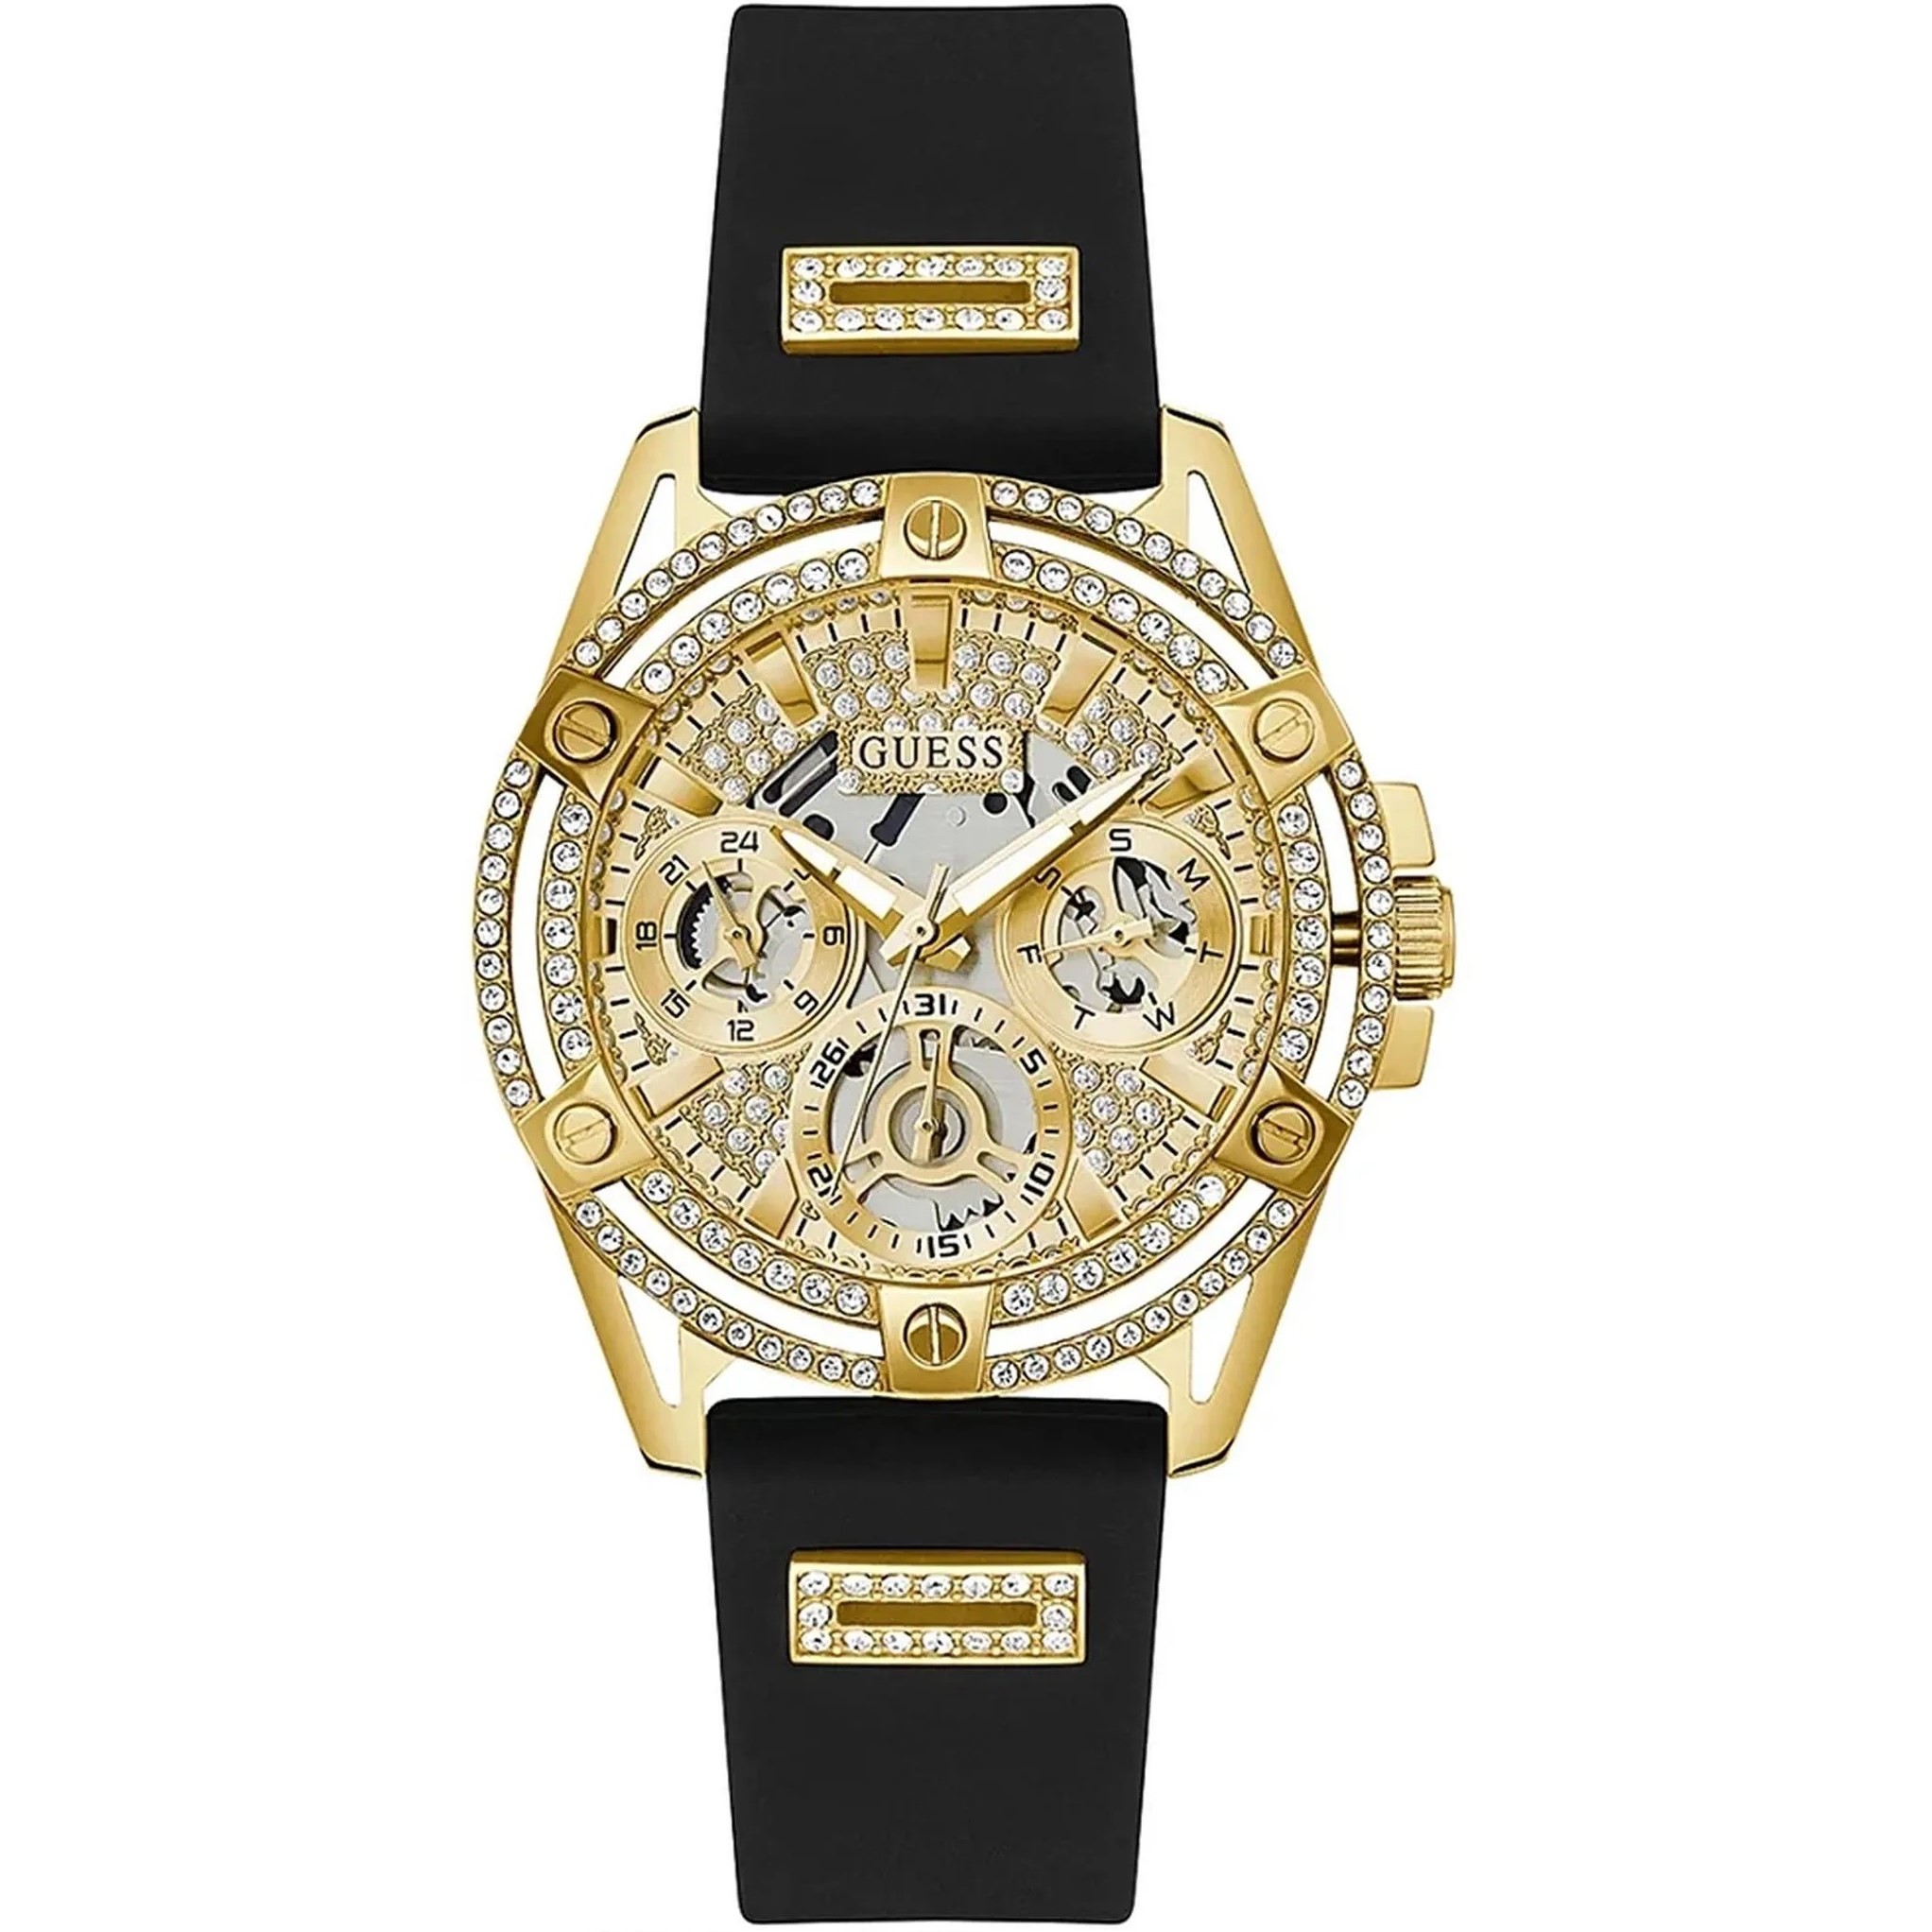 ĐỒNG HỒ ĐEO TAY GUESS GOLD-TONE MULTI-FUNCTION BLACK SILICONE WATCH GW0536L3 4